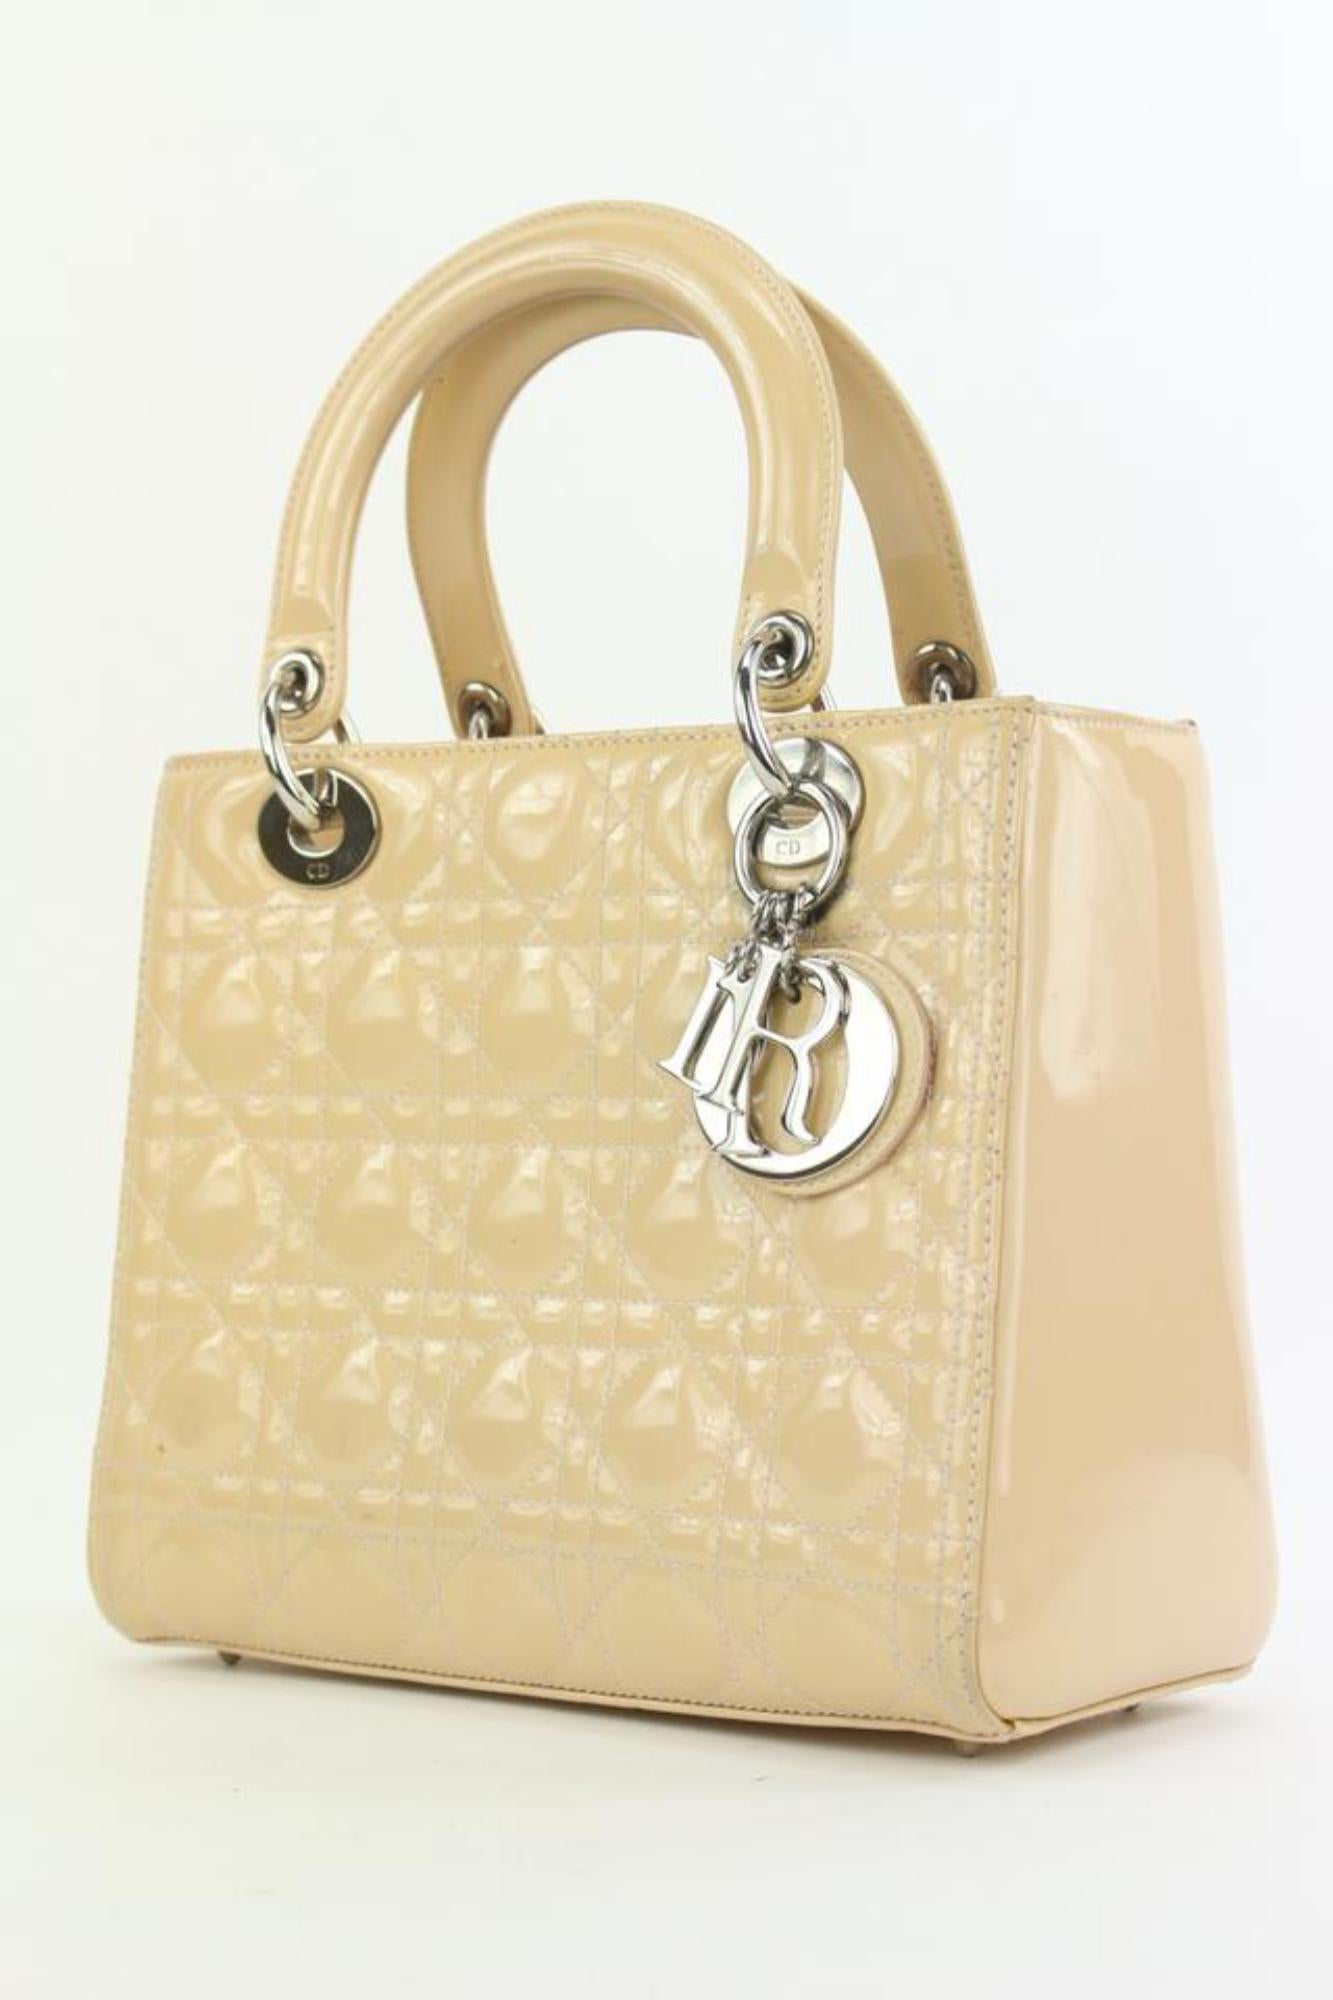 Christian Dior Beige Quilted Patent Cannage Lady Dior Tote Bag 16d412s
Date Code/Serial Number: 05-MA-0172
Made In: Italy
Measurements: Length:  9